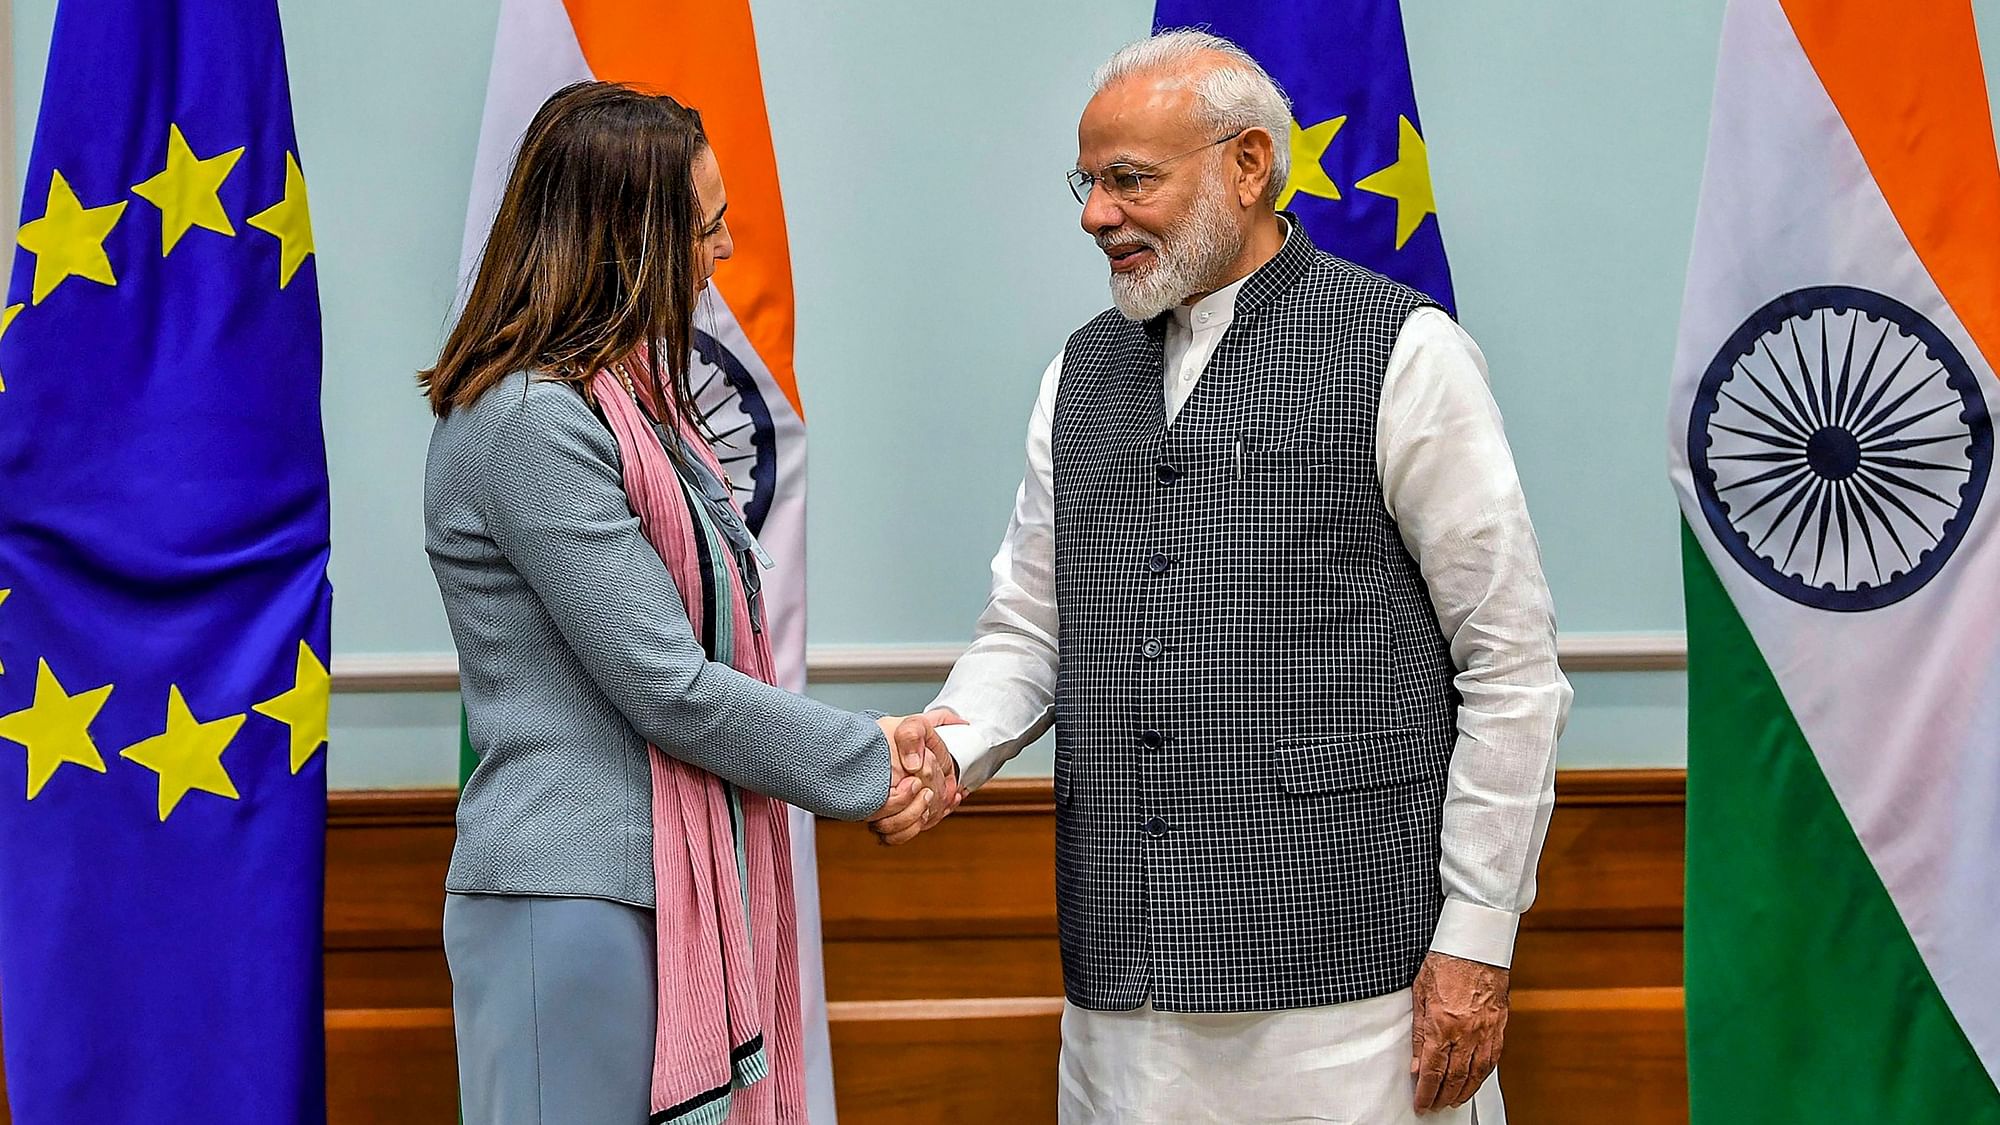 Prime Minister Narendra Modi shakes hands with a member of European Parliament on 28 October 2019.